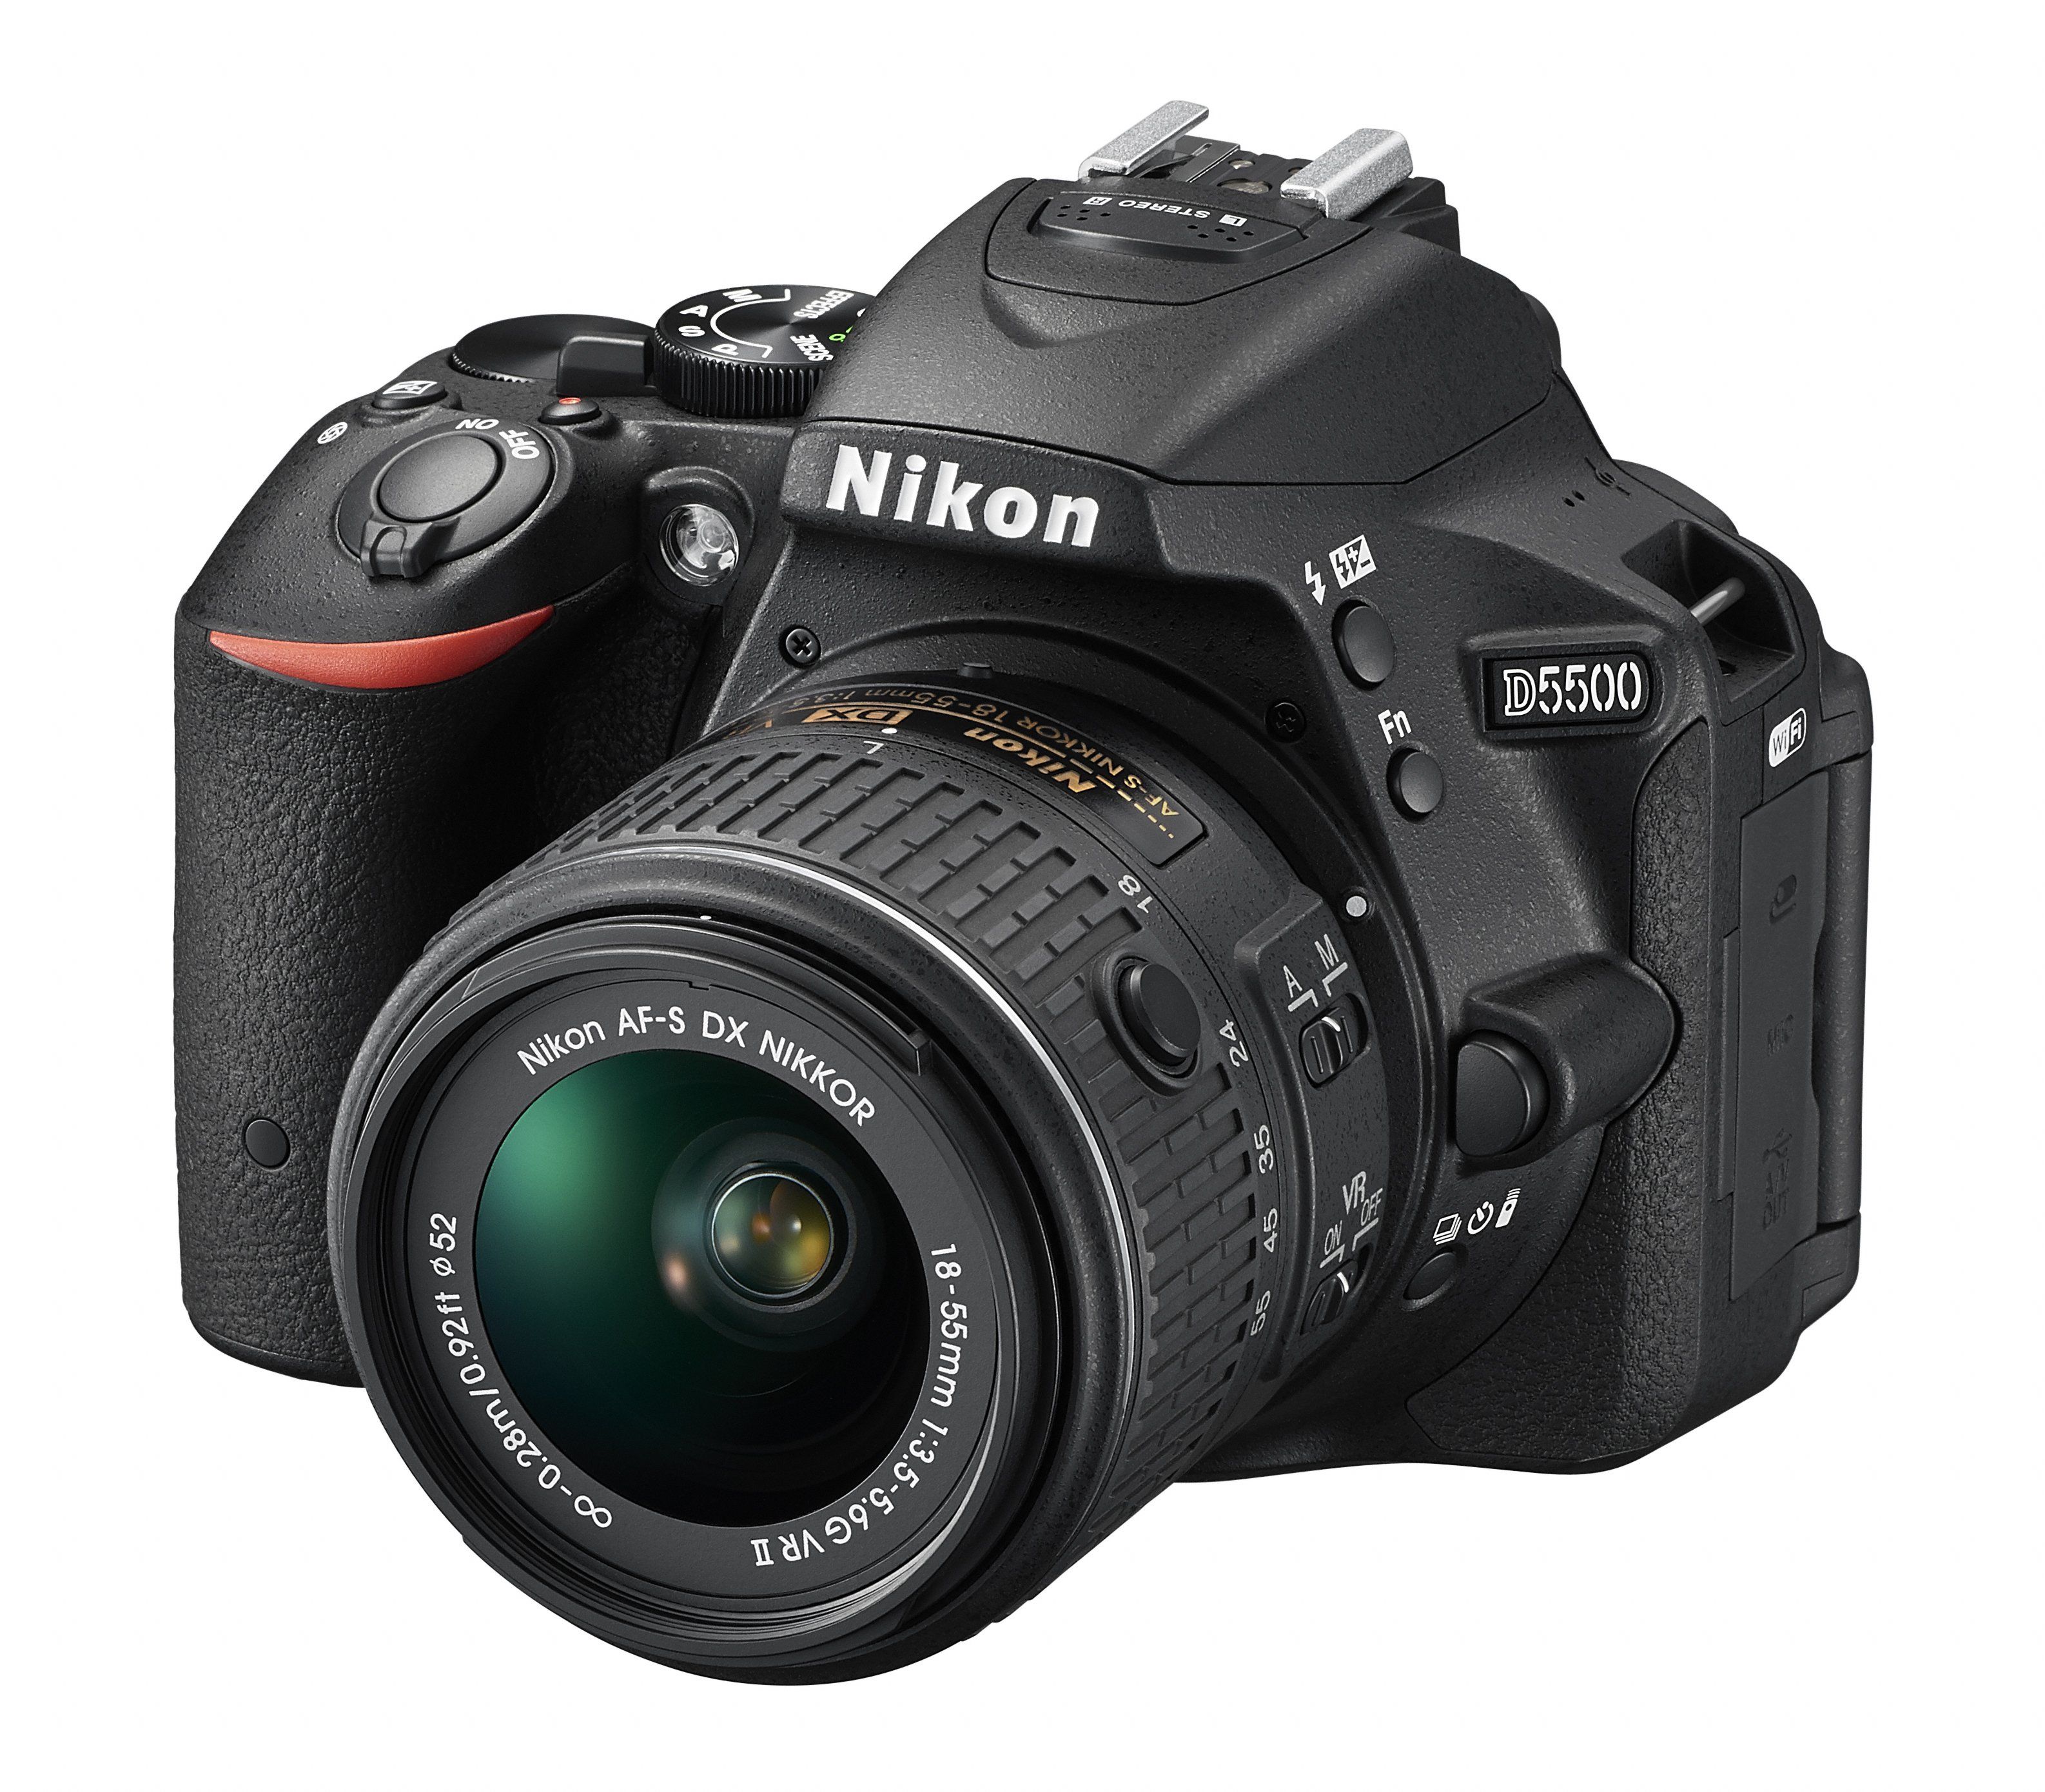 Nikon D5500 Camera with 18-55mm VR II Lens Kit Review, Price and